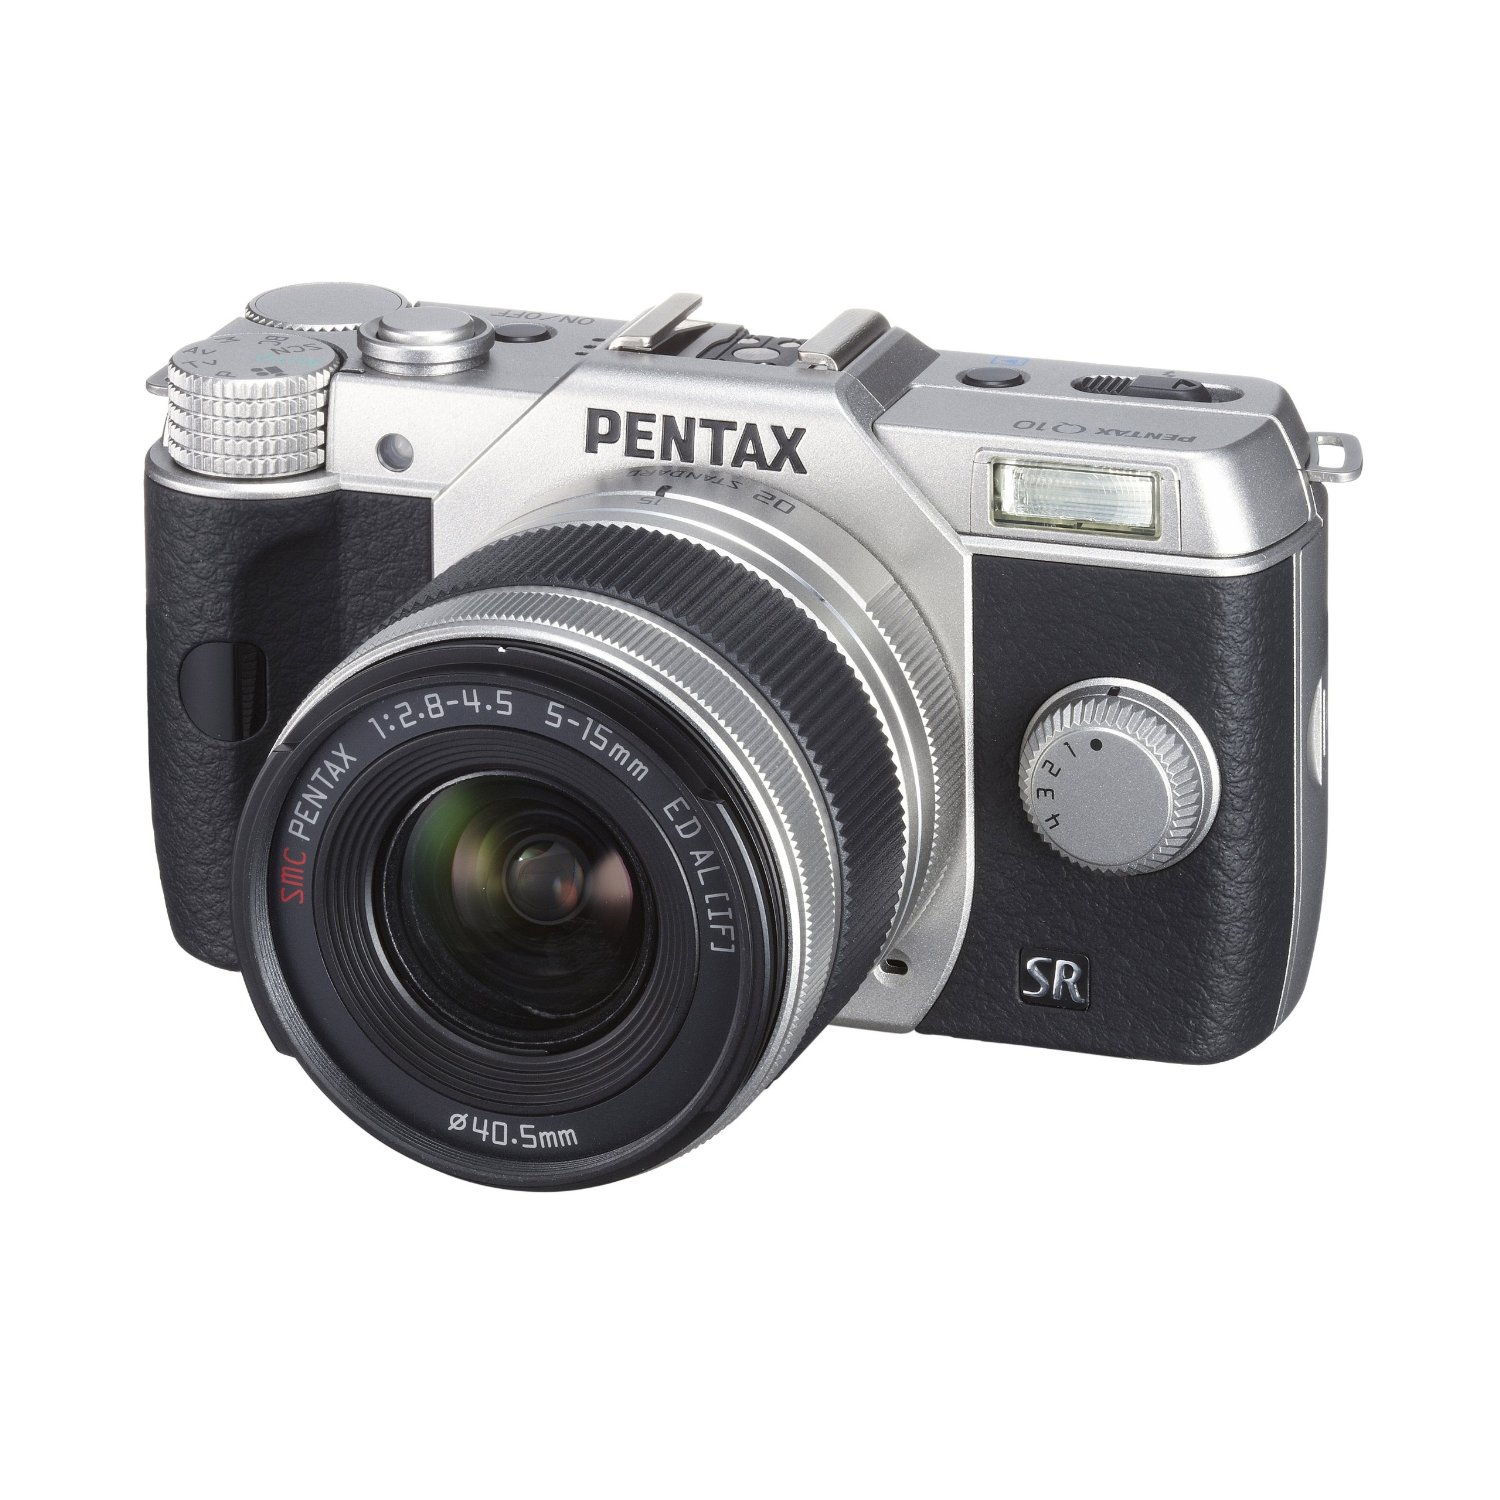 http://thetechjournal.com/wp-content/uploads/images/1210/1350236866-pentax-brings-q10-124mp-compact-camera-3.jpg